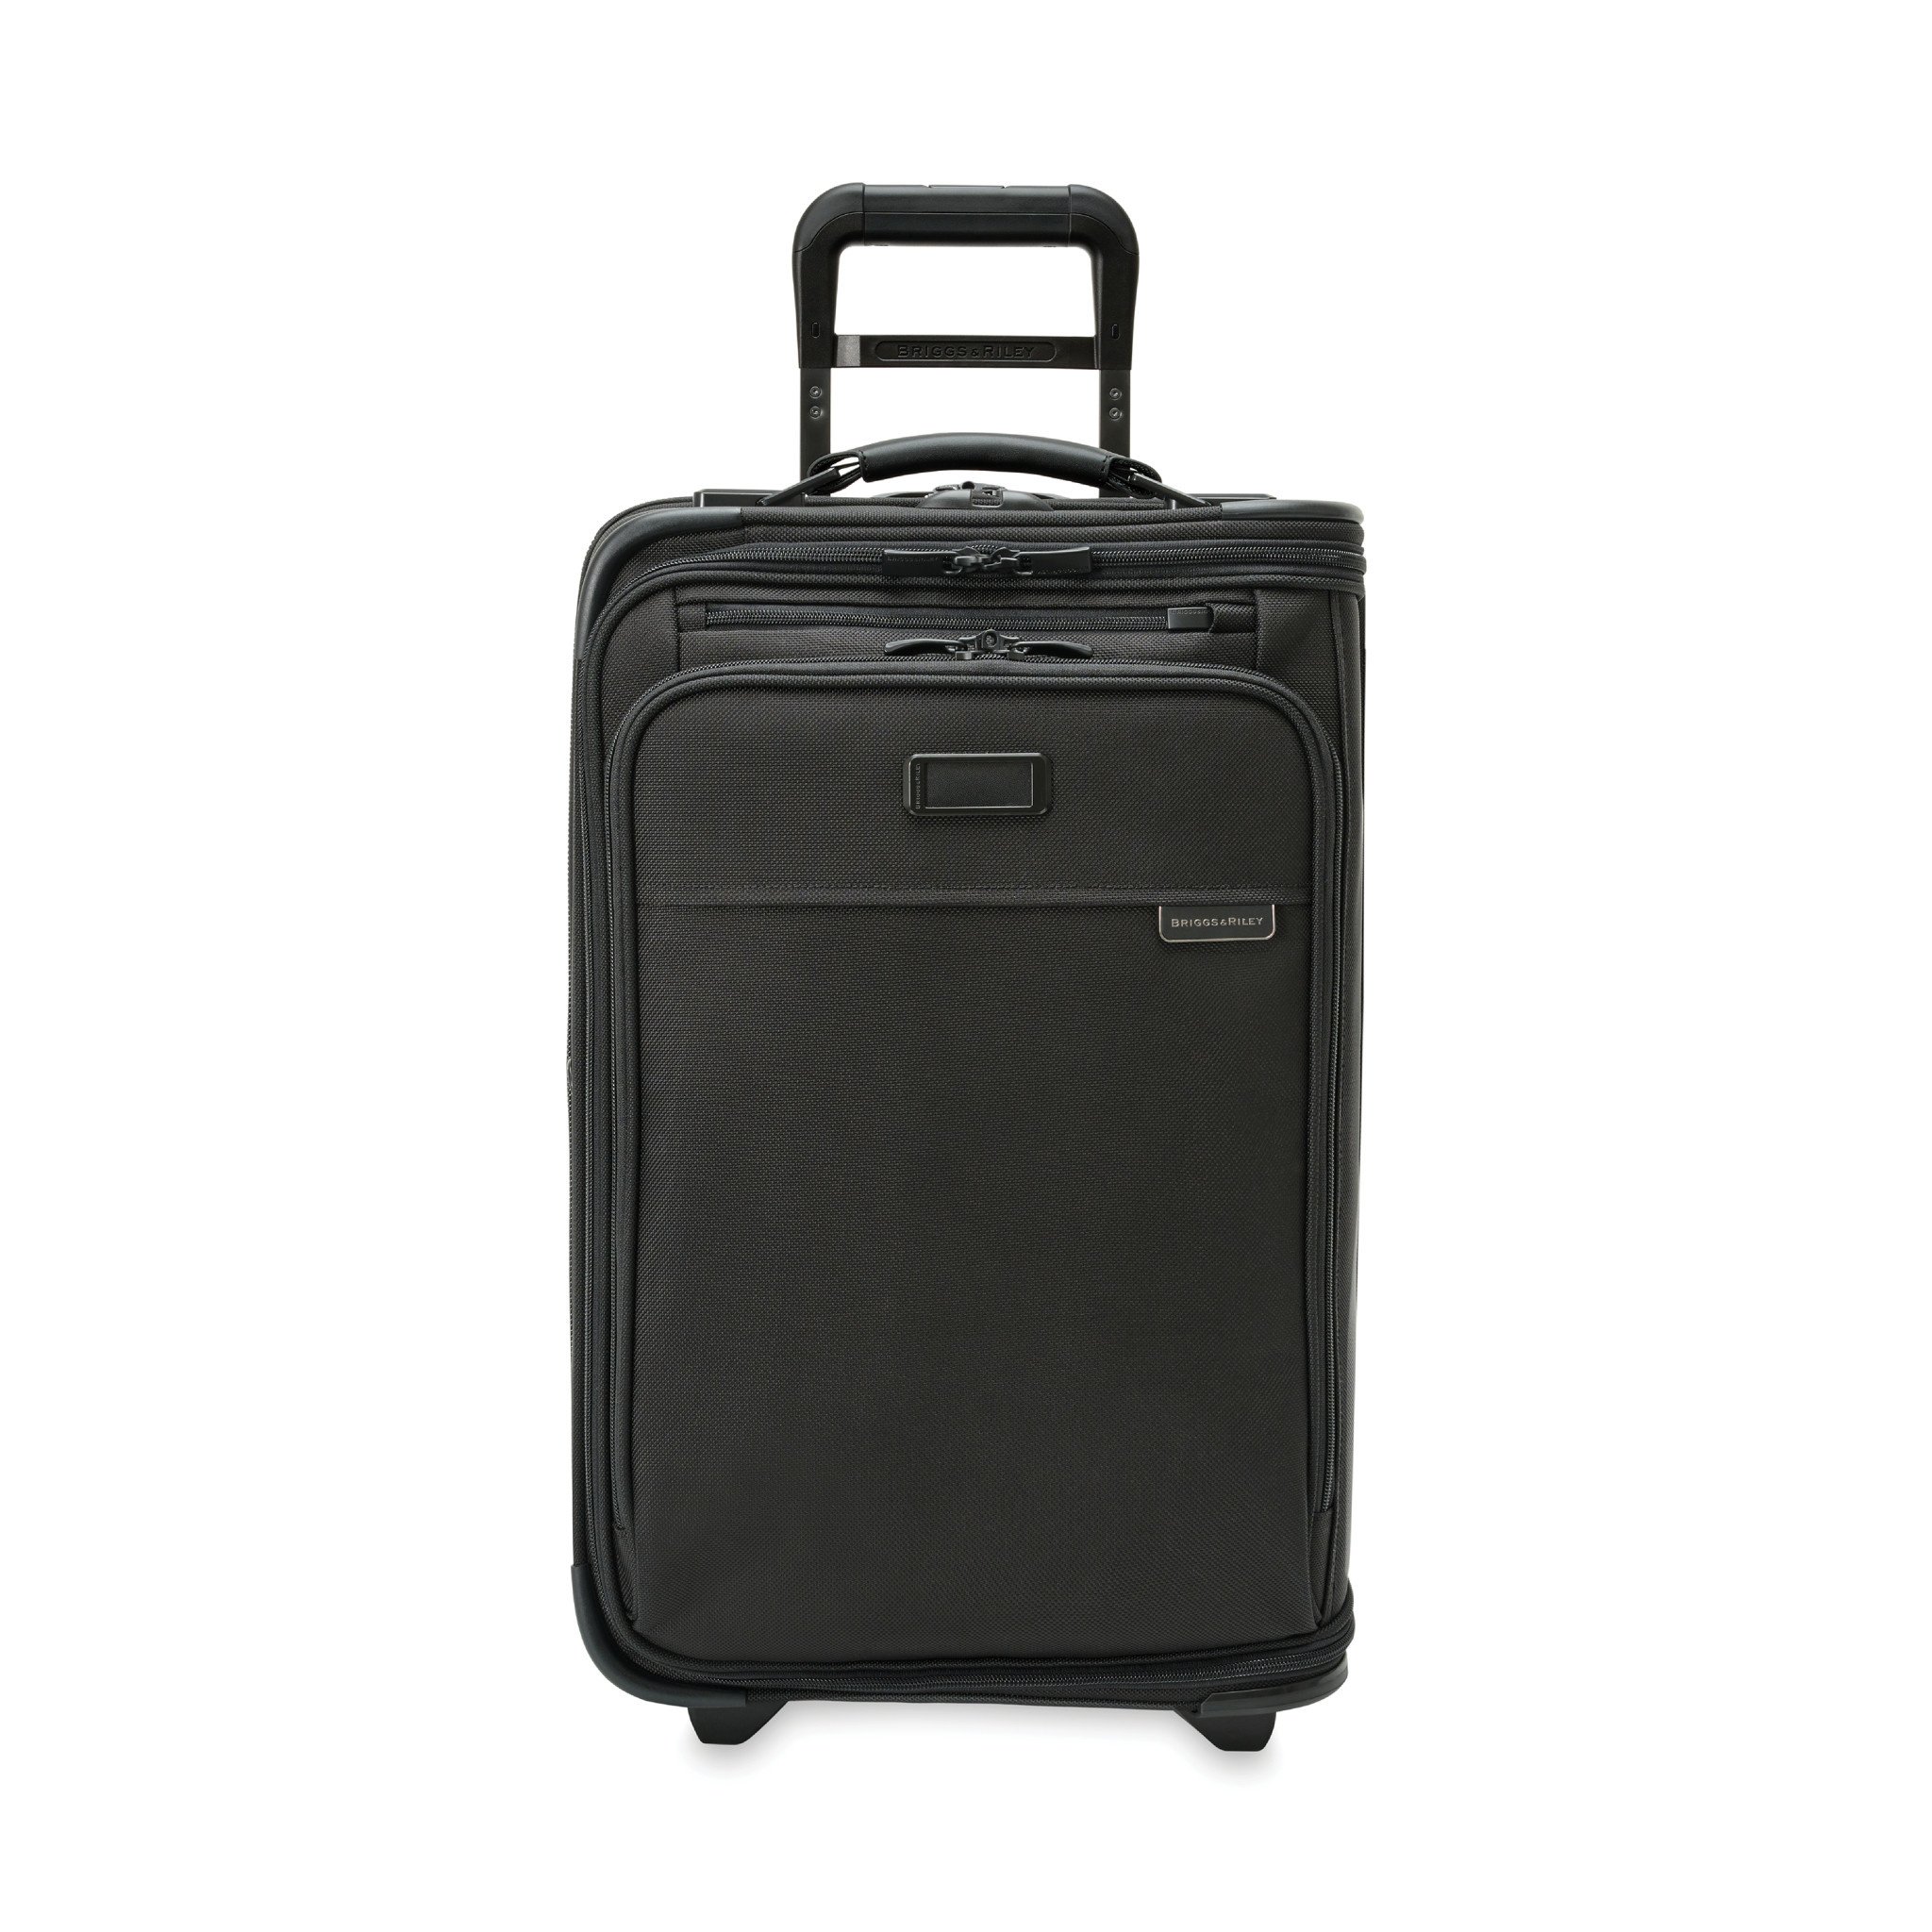 Briggs & Riley Baseline Carry-On Upright Garment Bag - Black - Just Bags  Luggage Center